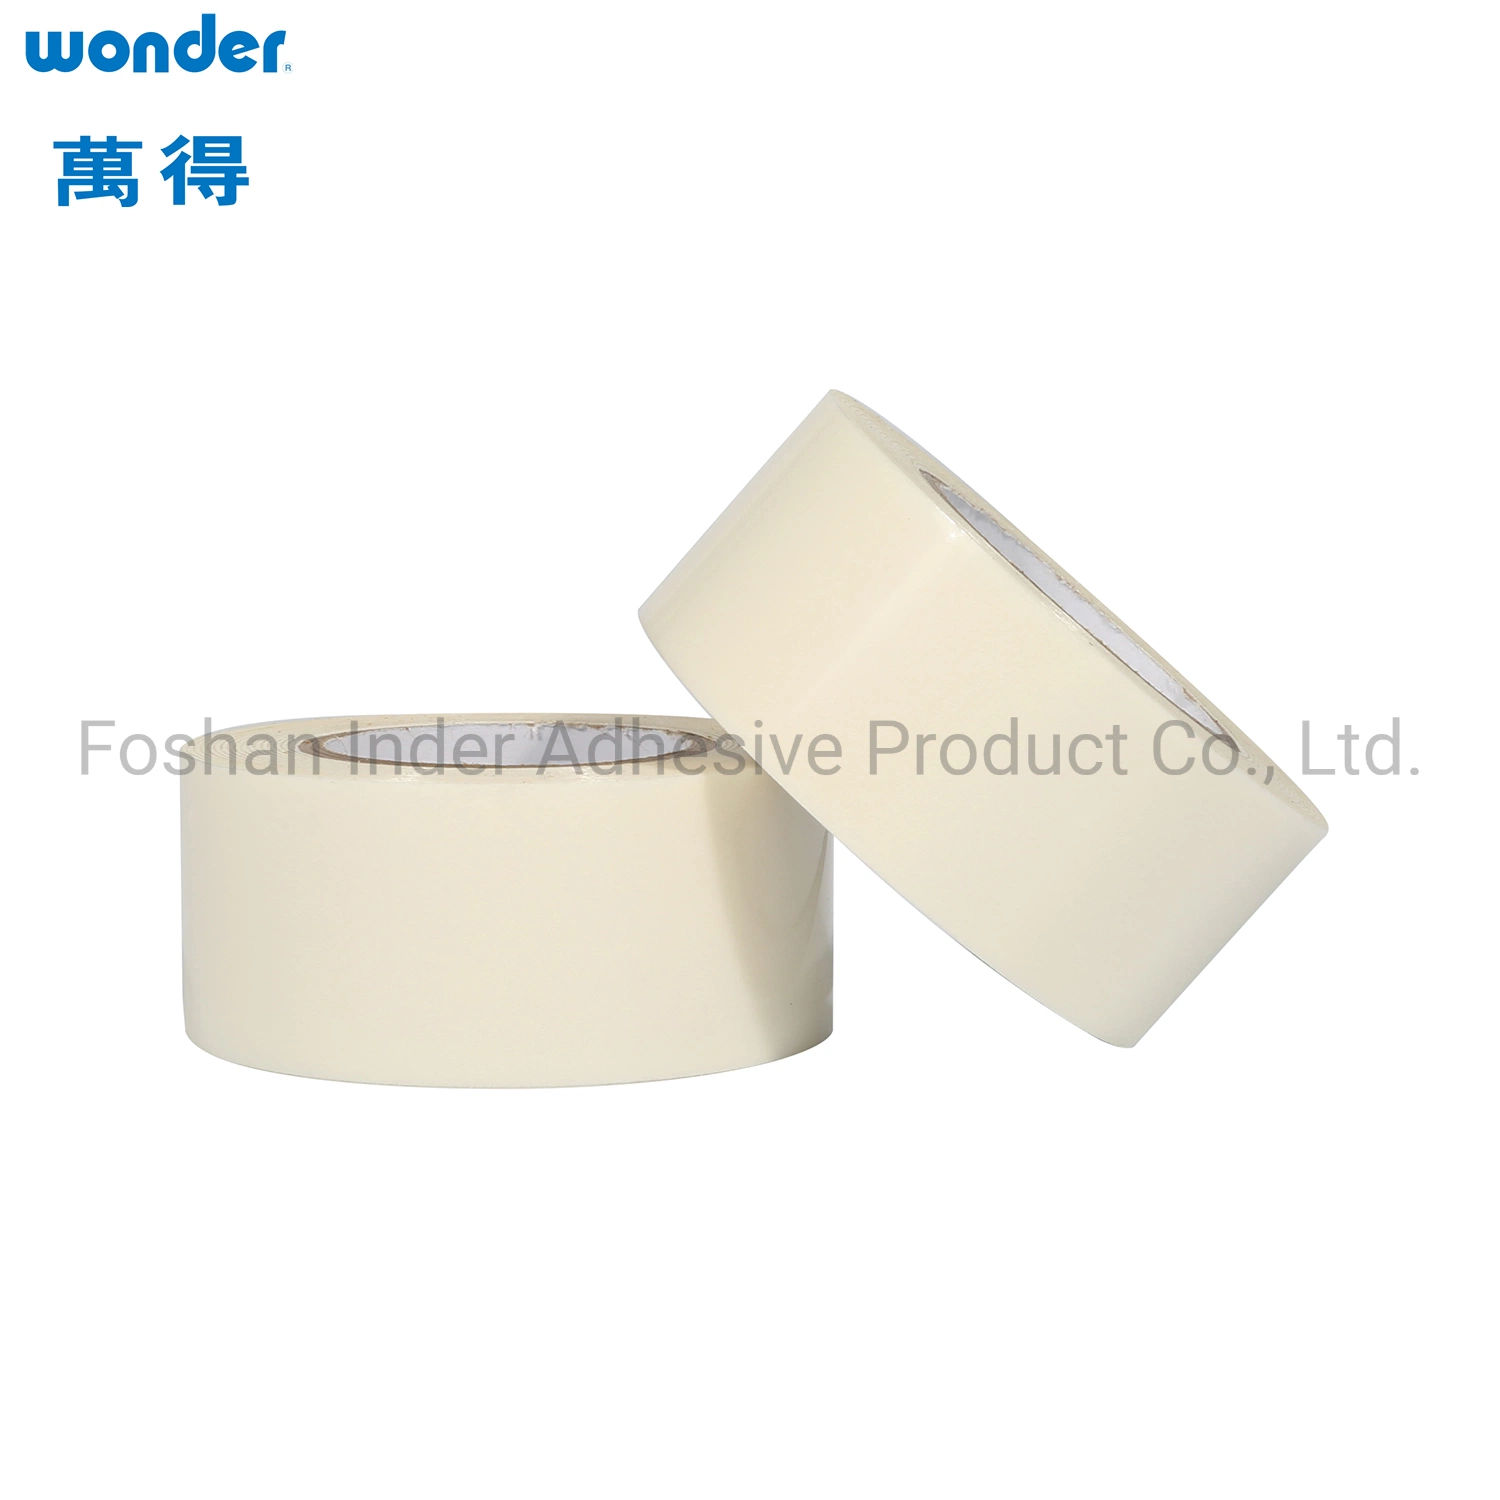 Wonder 63532 Solvent Based Good Quality Self Adhesive Double Sided Tissue Tape